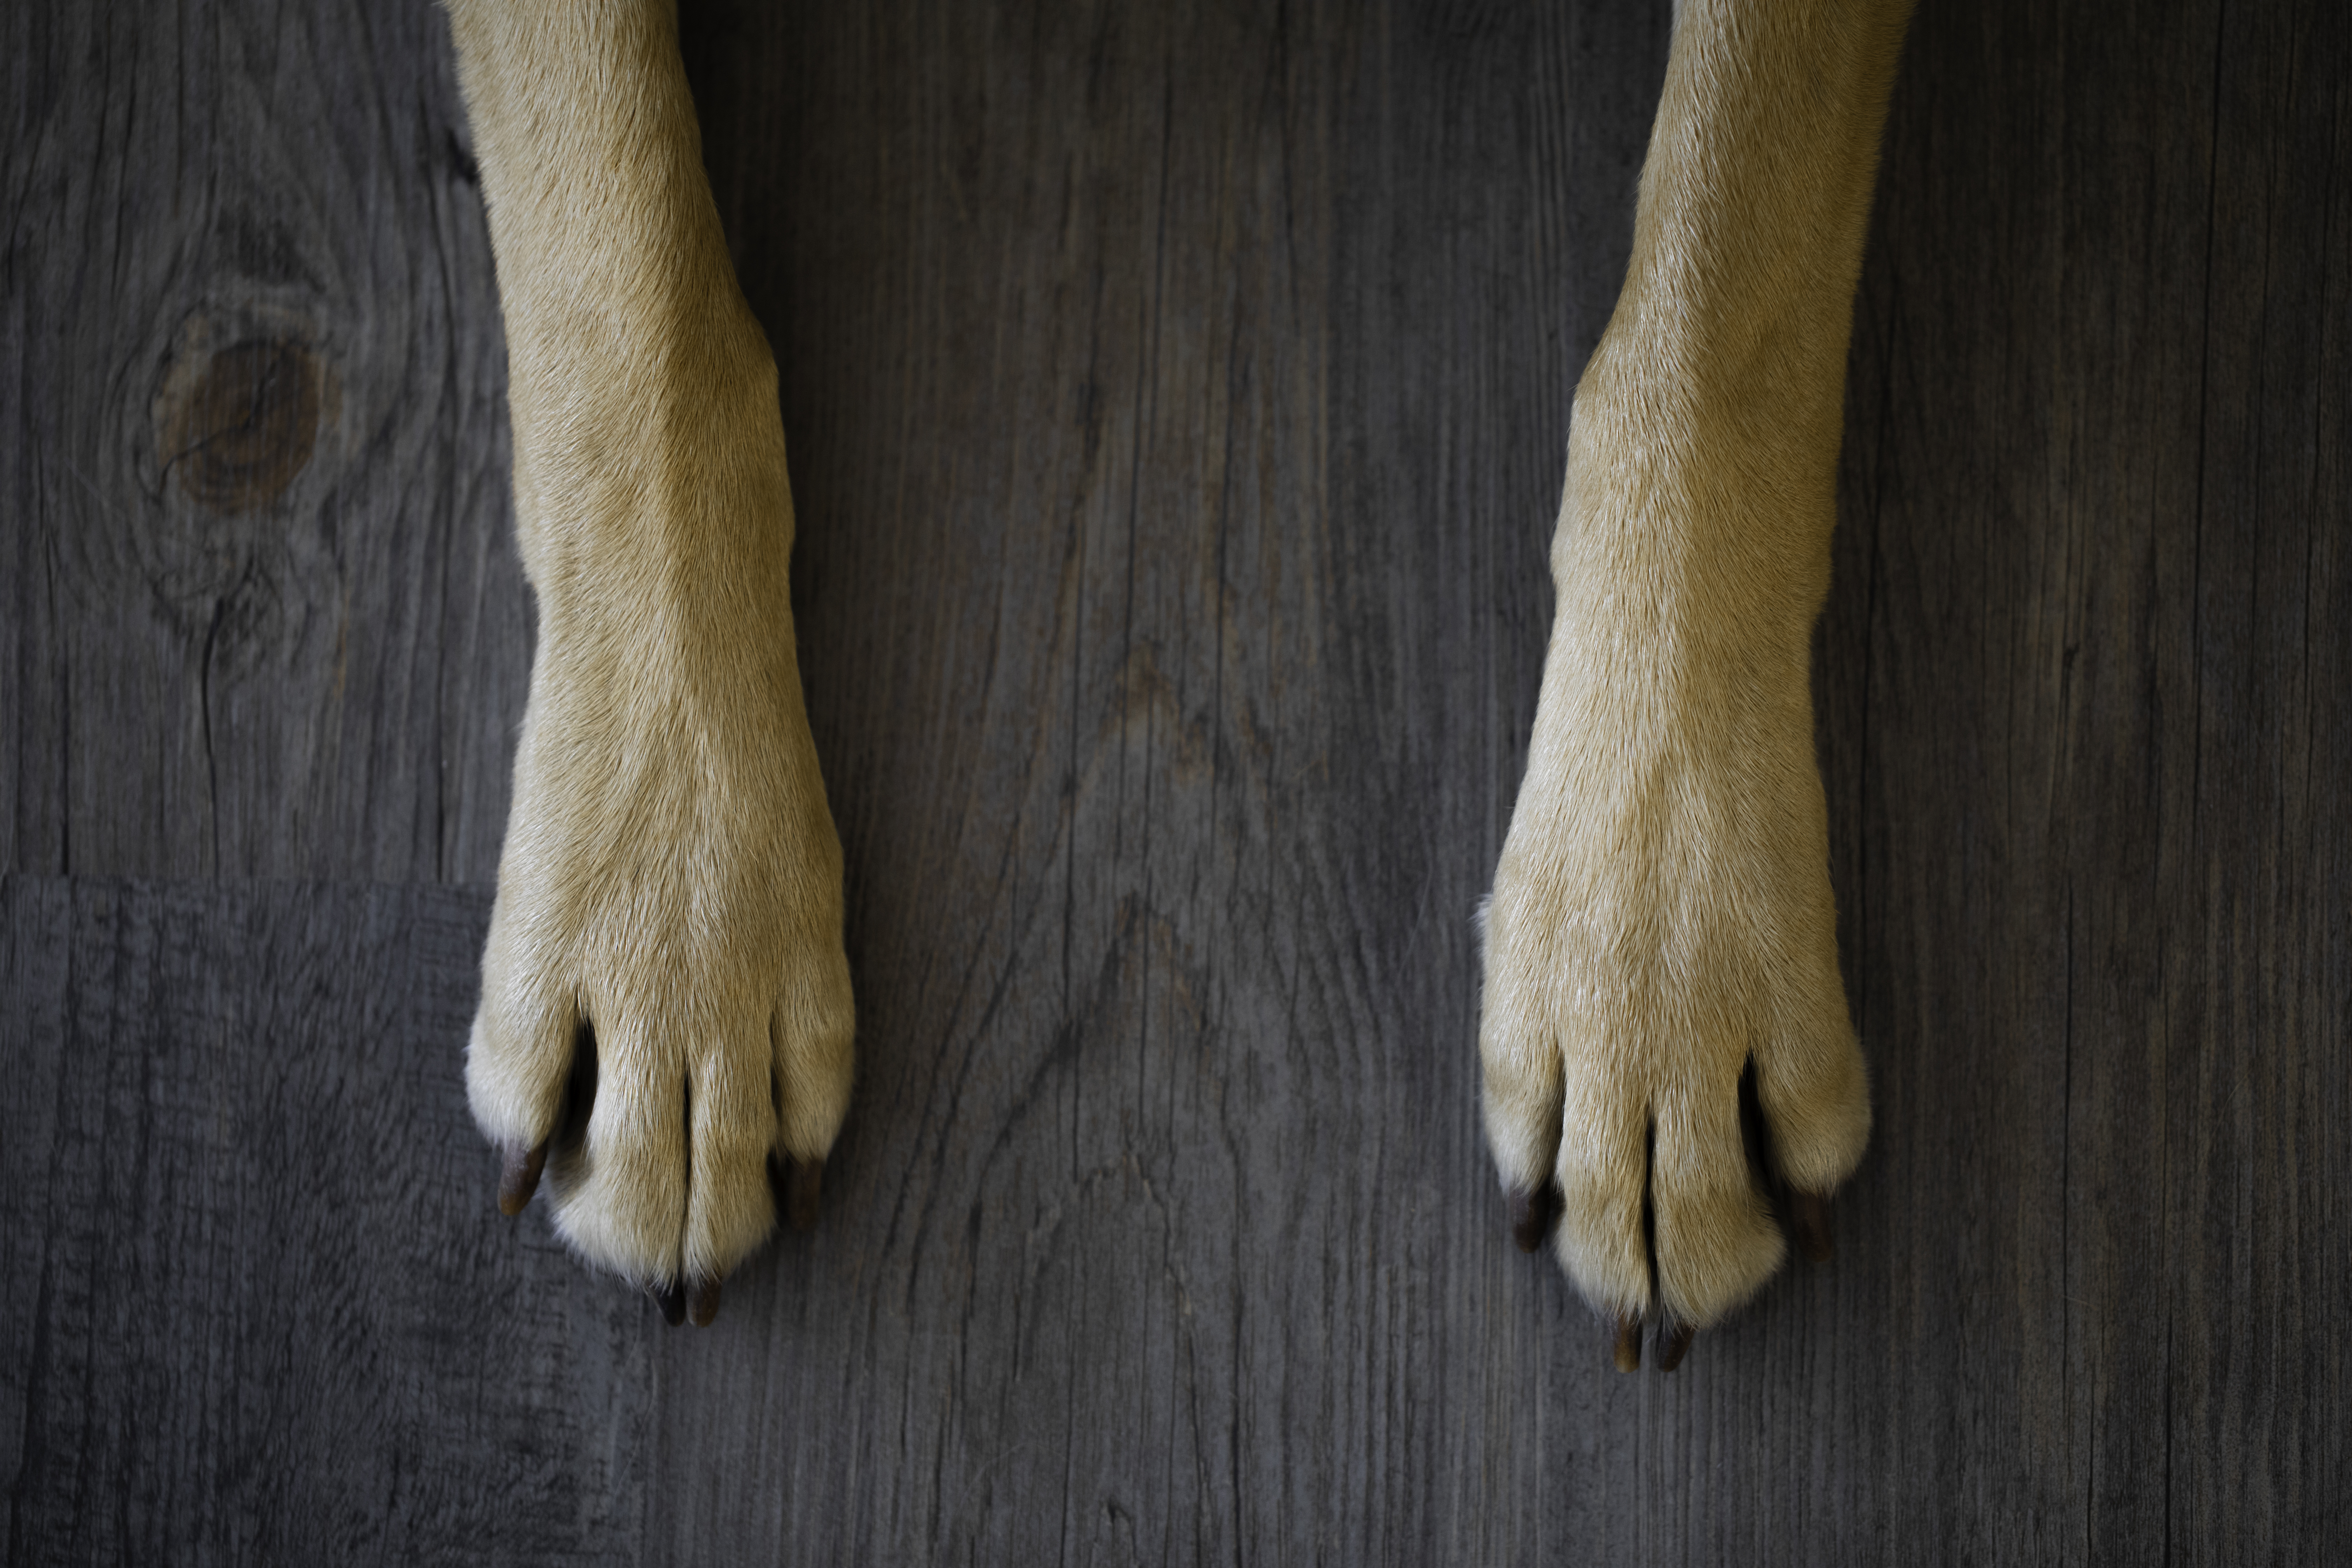 A pair of dog's paws